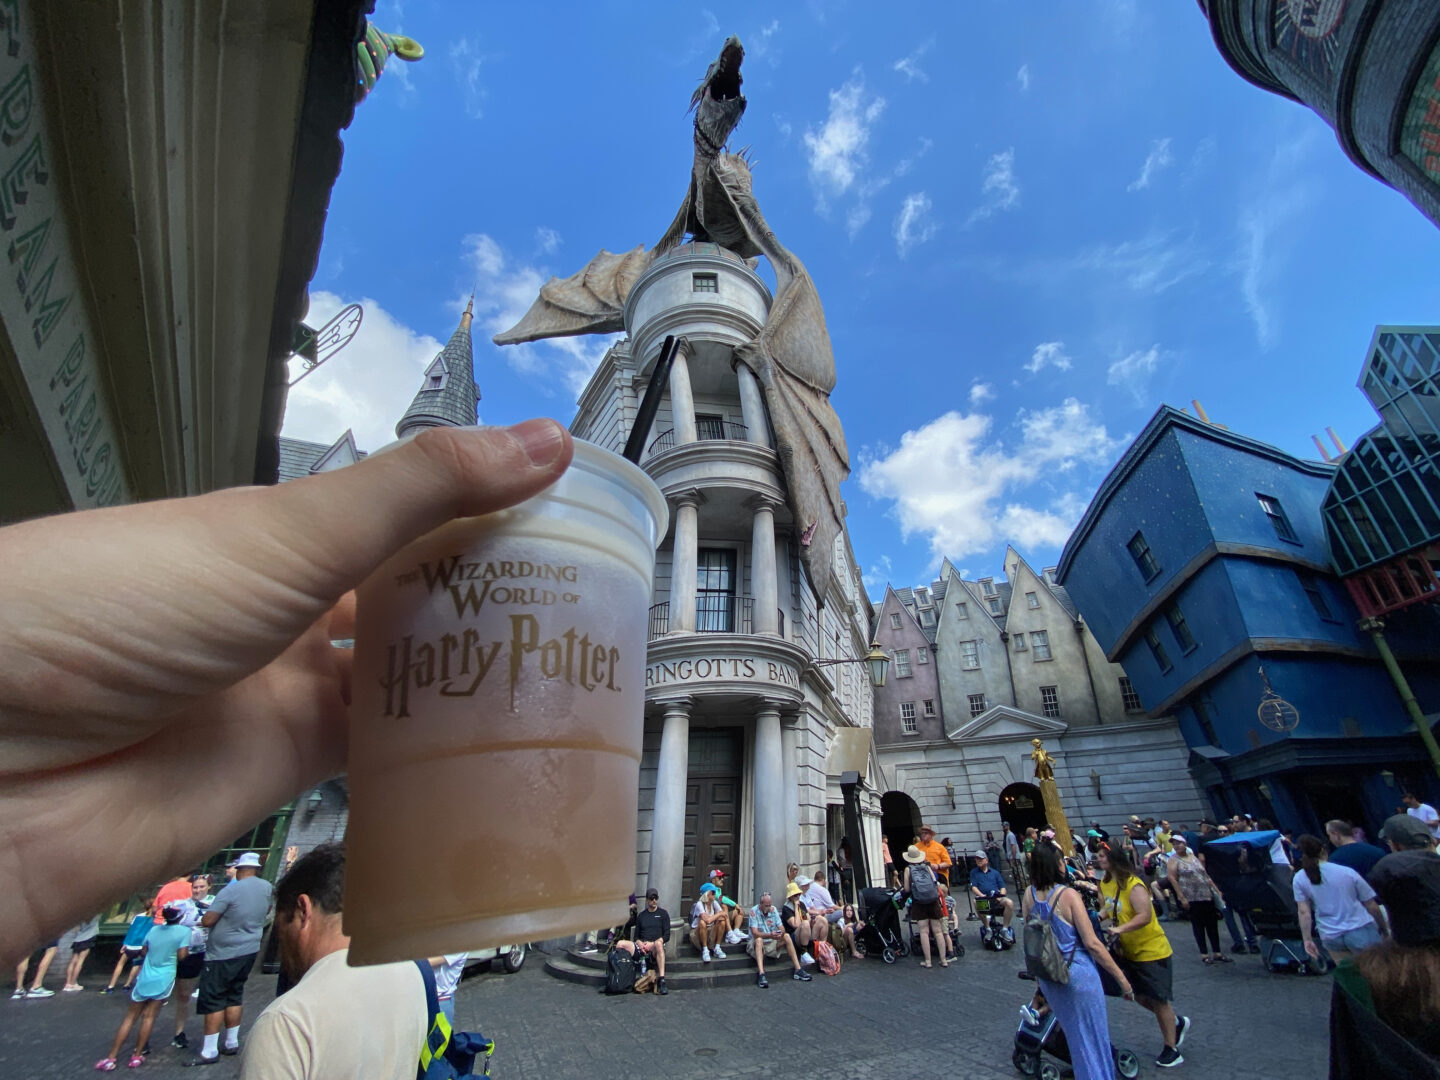 Butterbeer at the Wizarding World of Harry Potter in Diagon Alley